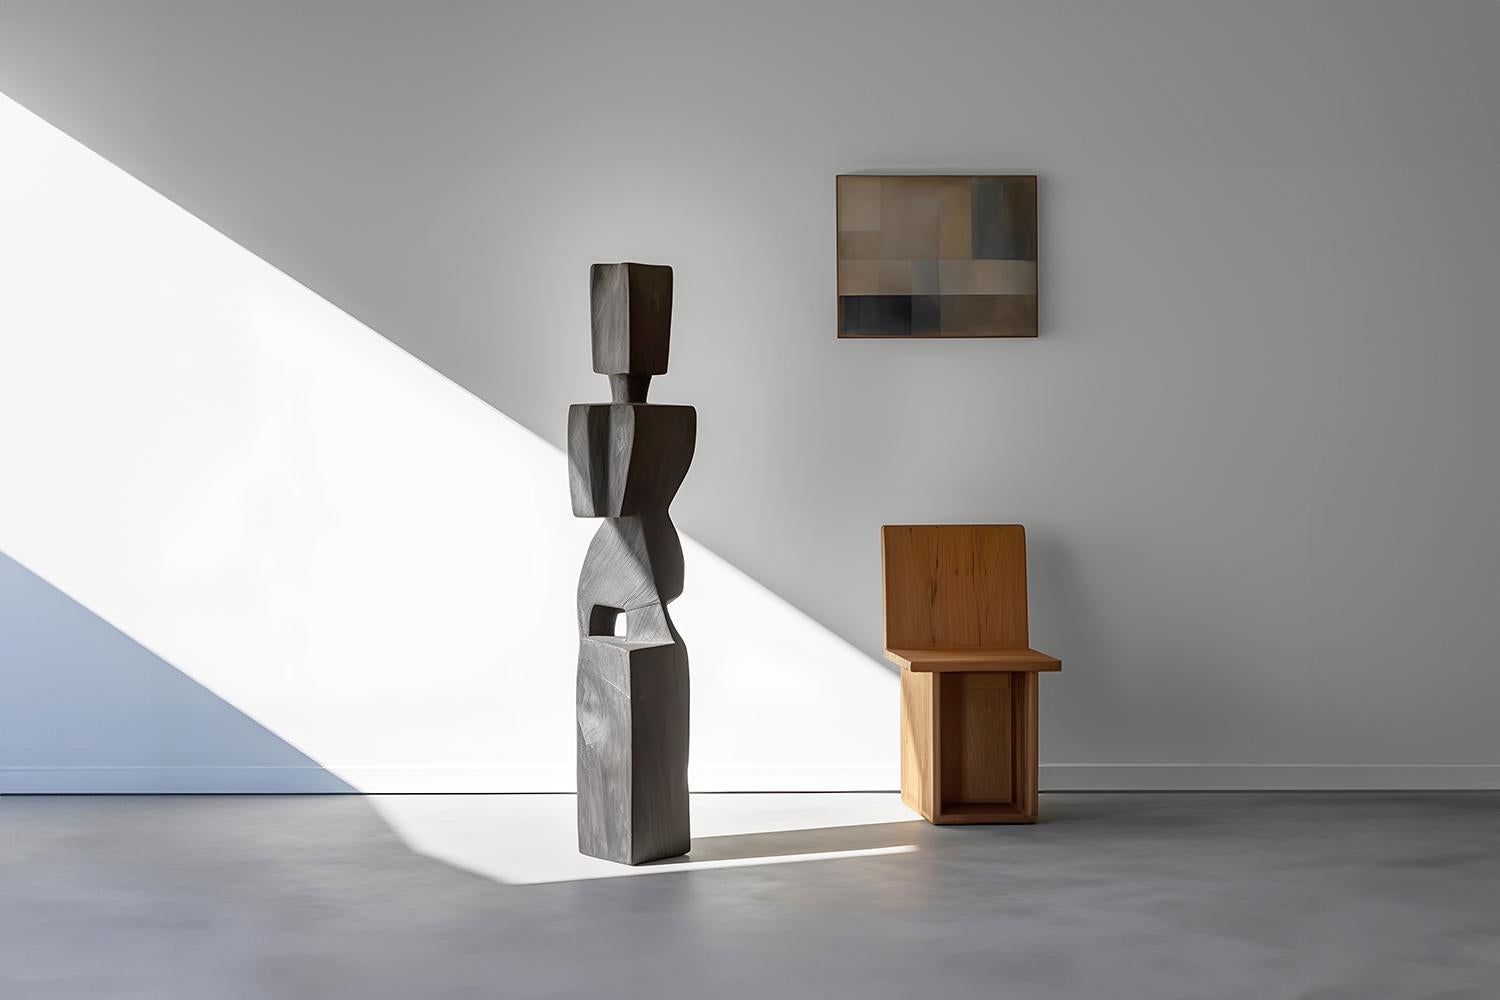 Monumental Wooden Sculpture Inspired in Constantin Brancusi Style, Unseen Force 24 by Joel Escalona

This monolithic sculpture, designed by the talented Artist Joel Escalona, is a towering example of beauty in craftsmanship. Hand and digital machine